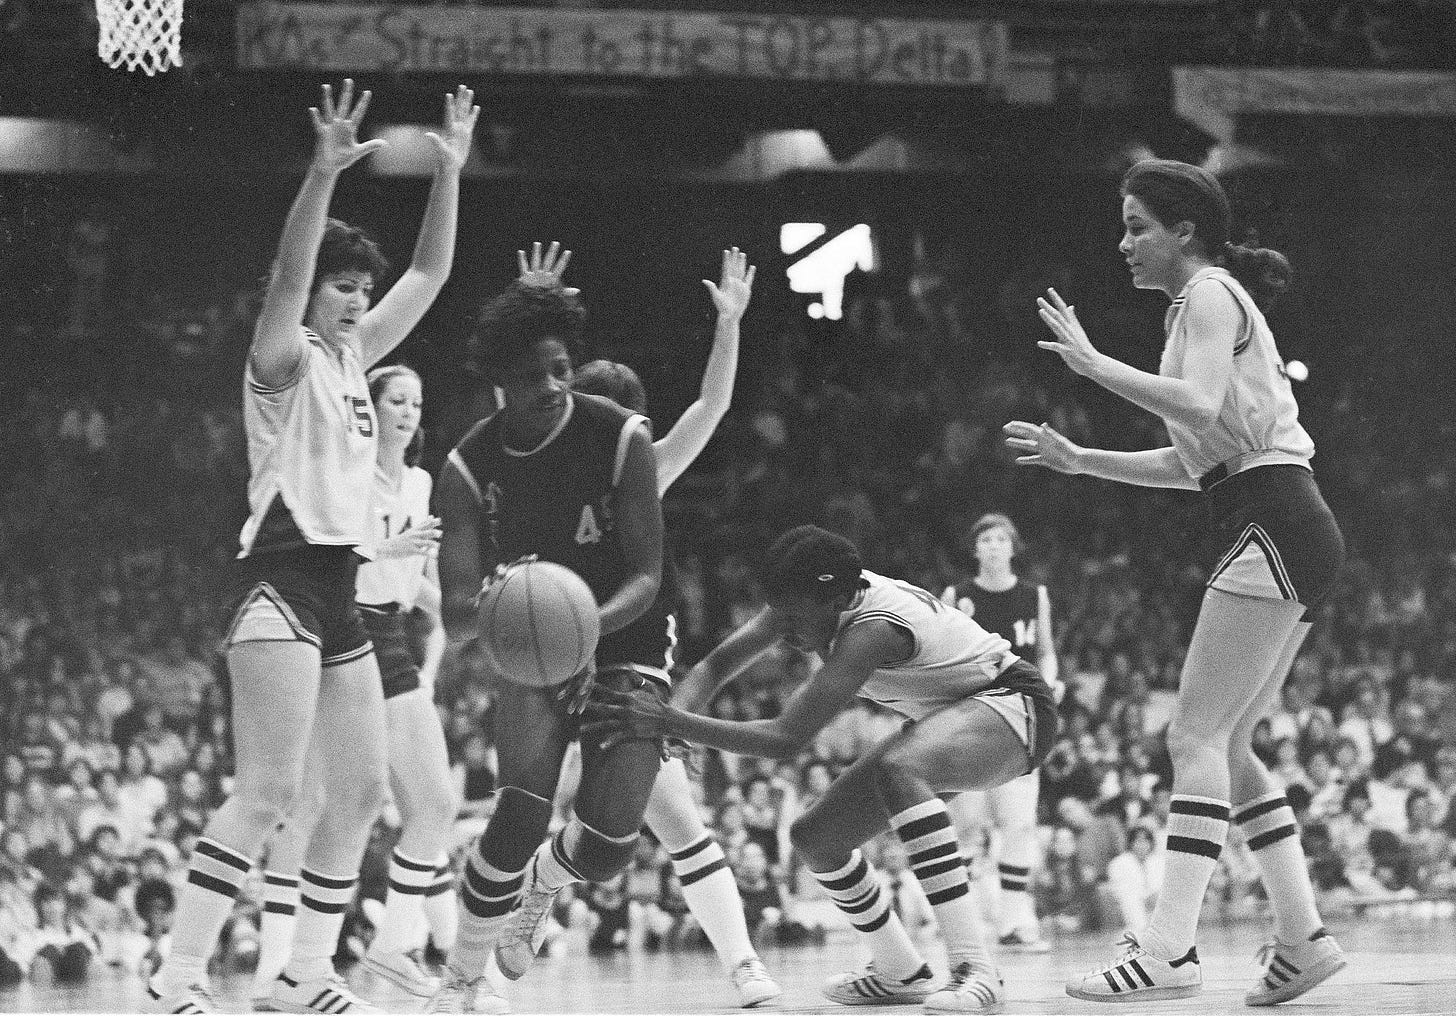 Delta State's Lusia Harris, center, drives through the Louisiana State defense during the AIAW basketball championship game in Minneapolis, Minn., March 26, 1977. Delta State won, 68-55.